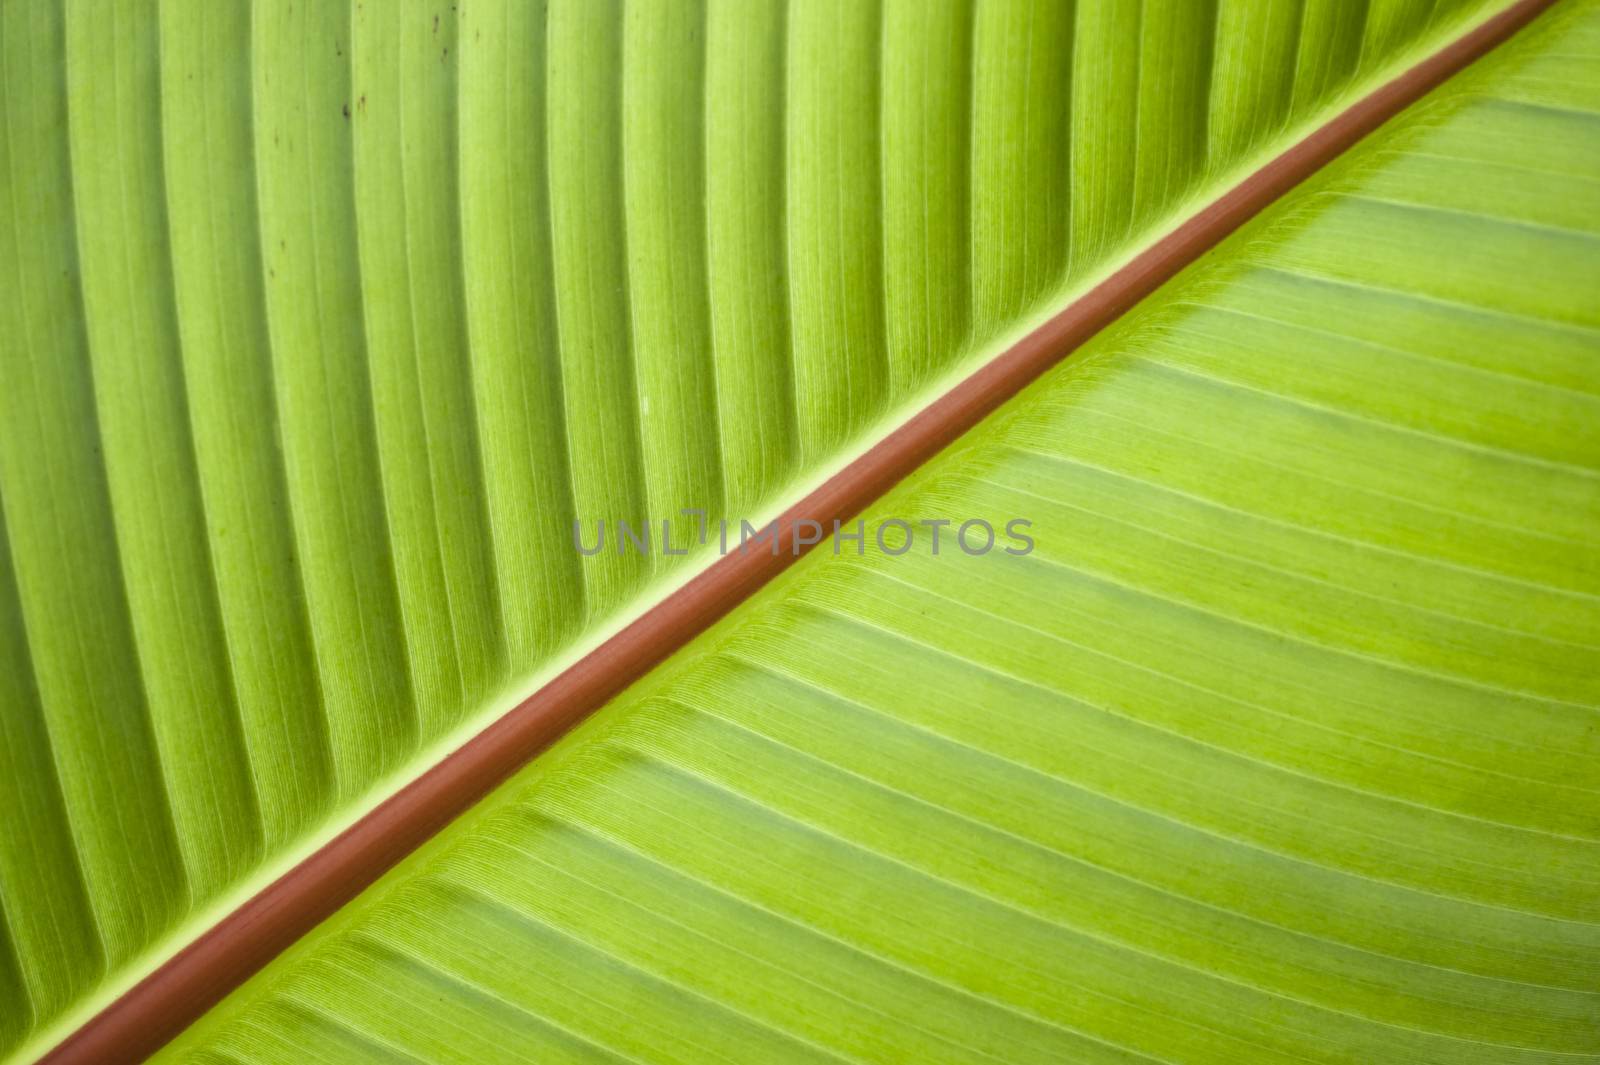 Detail of leaf of Banana tree by AlessandroZocc